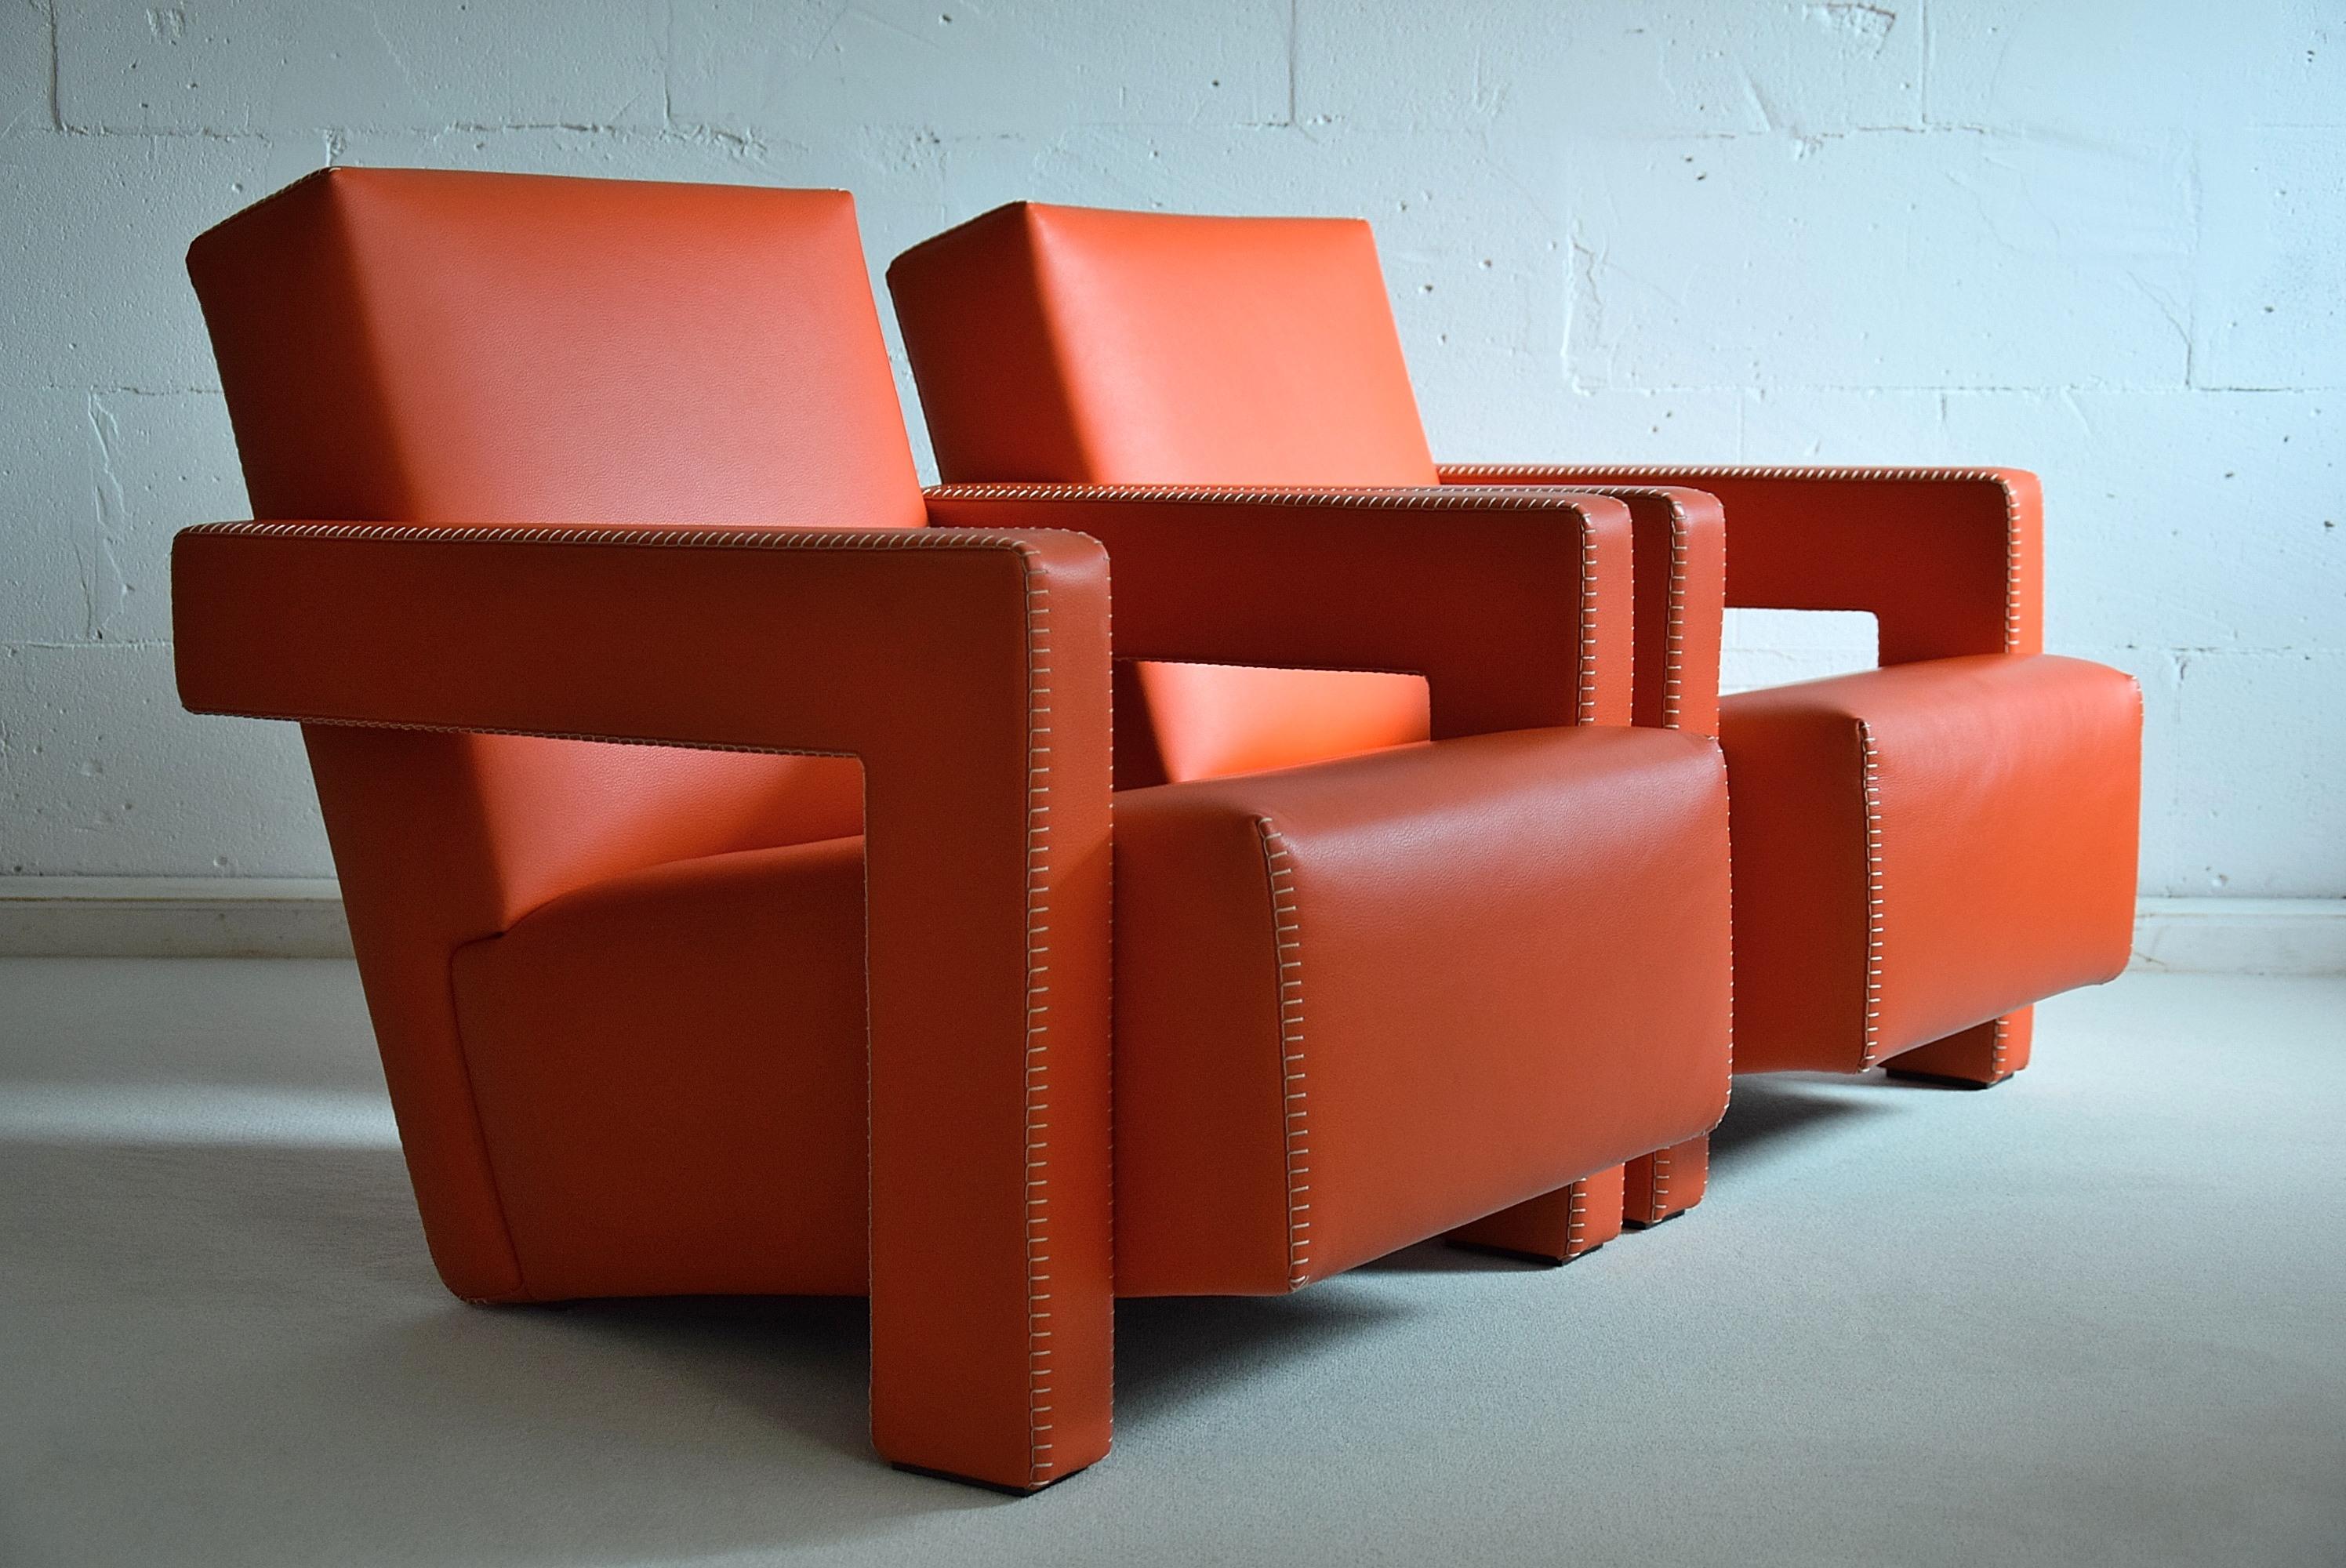 Gerrit Rietveld Hermès orange leather Utrecht armchairs in fantastic condition. Rietveld, Dutch architect with a strong bent for experimentation, and one of the founders, with Mondrian, of the neo-plastic de stijl movement in 1917, designed the